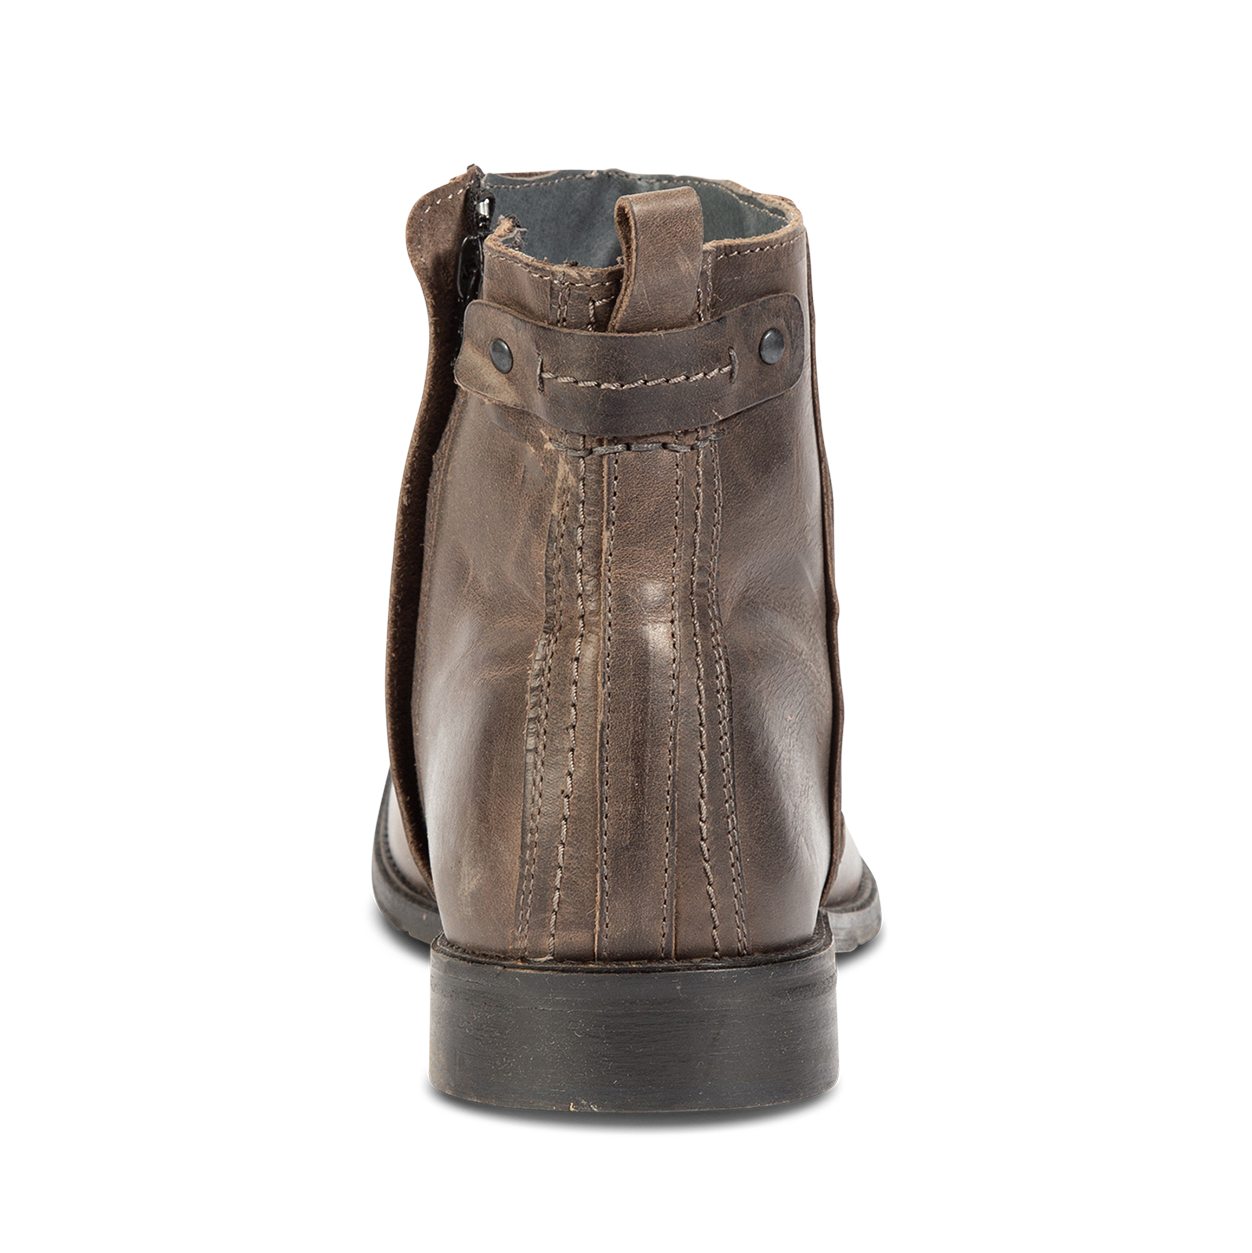 Back view showing back pull tab and leather detail on FREEBIRD men's Twist grey ankle boot